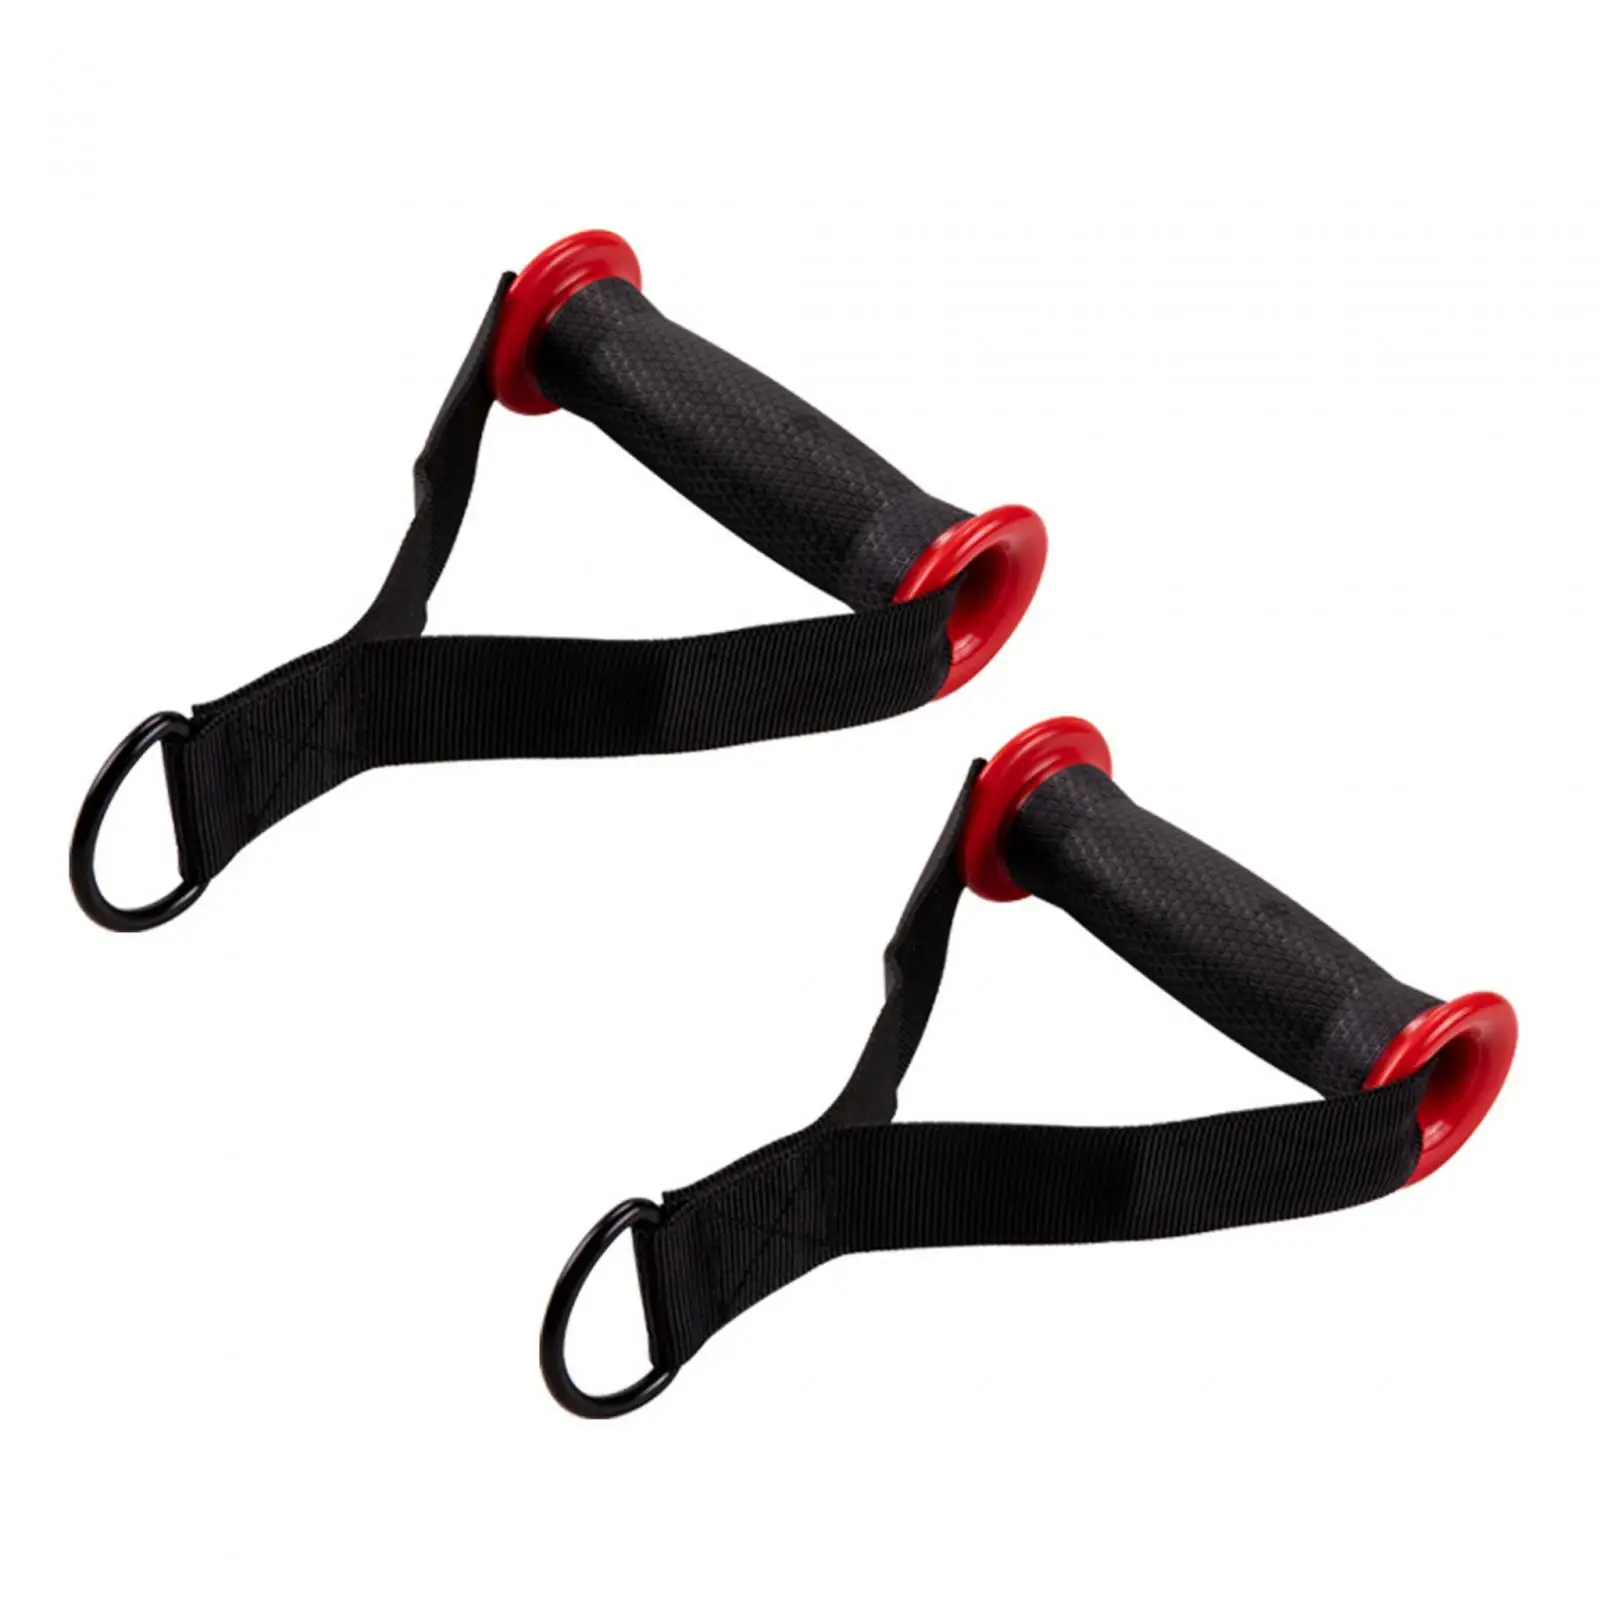 2Pcs Gym Handle Resistance Bands Gym Accessory Multi Attachment Stirrup Heavy Duty Fitness Straps Strength Pull Handles